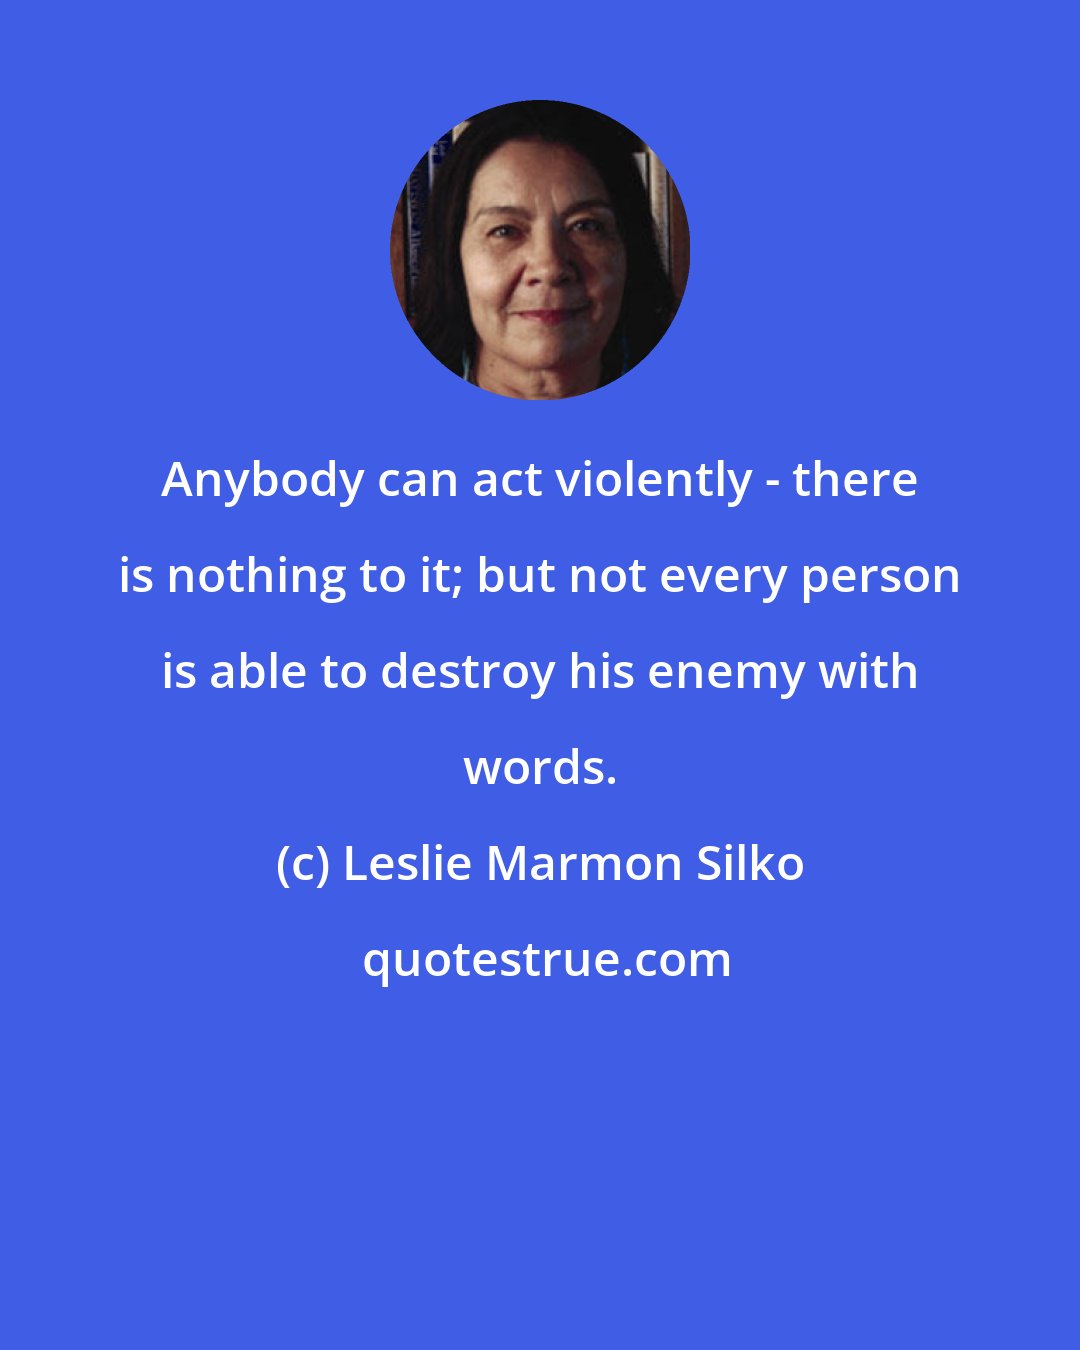 Leslie Marmon Silko: Anybody can act violently - there is nothing to it; but not every person is able to destroy his enemy with words.